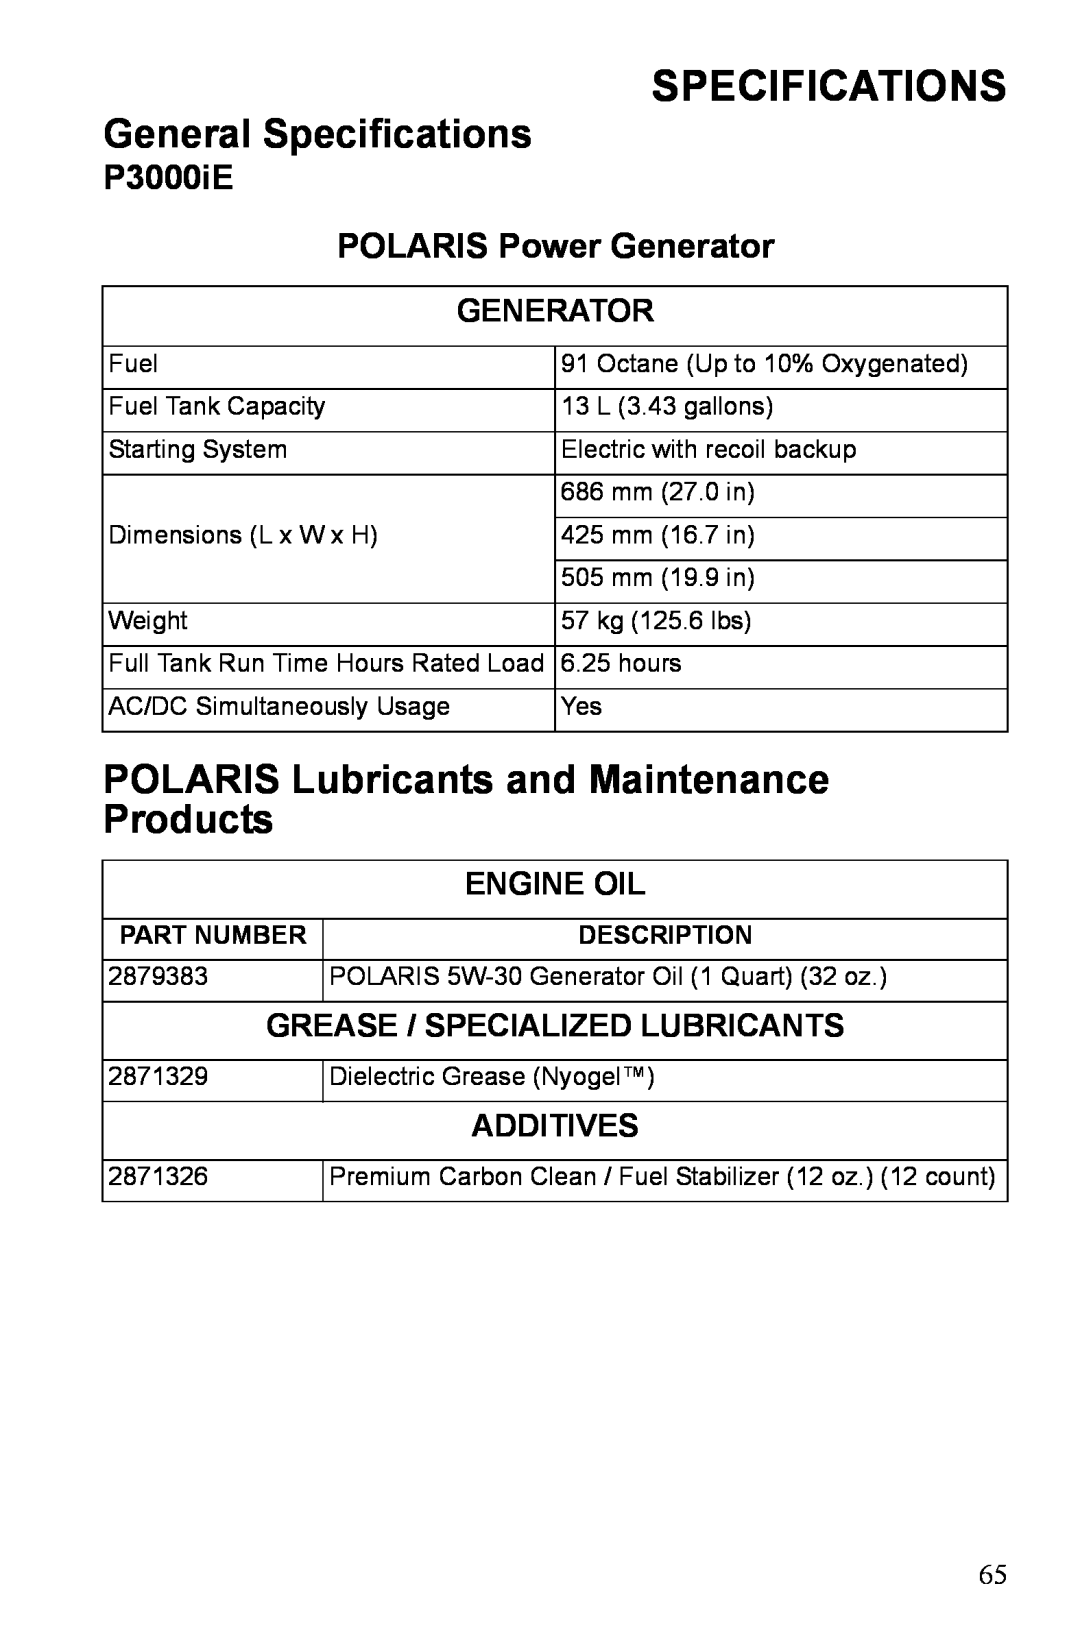 Polaris manual Specifications, P3000iE POLARIS Power Generator, Engine Oil, Grease / Specialized Lubricants, Additives 